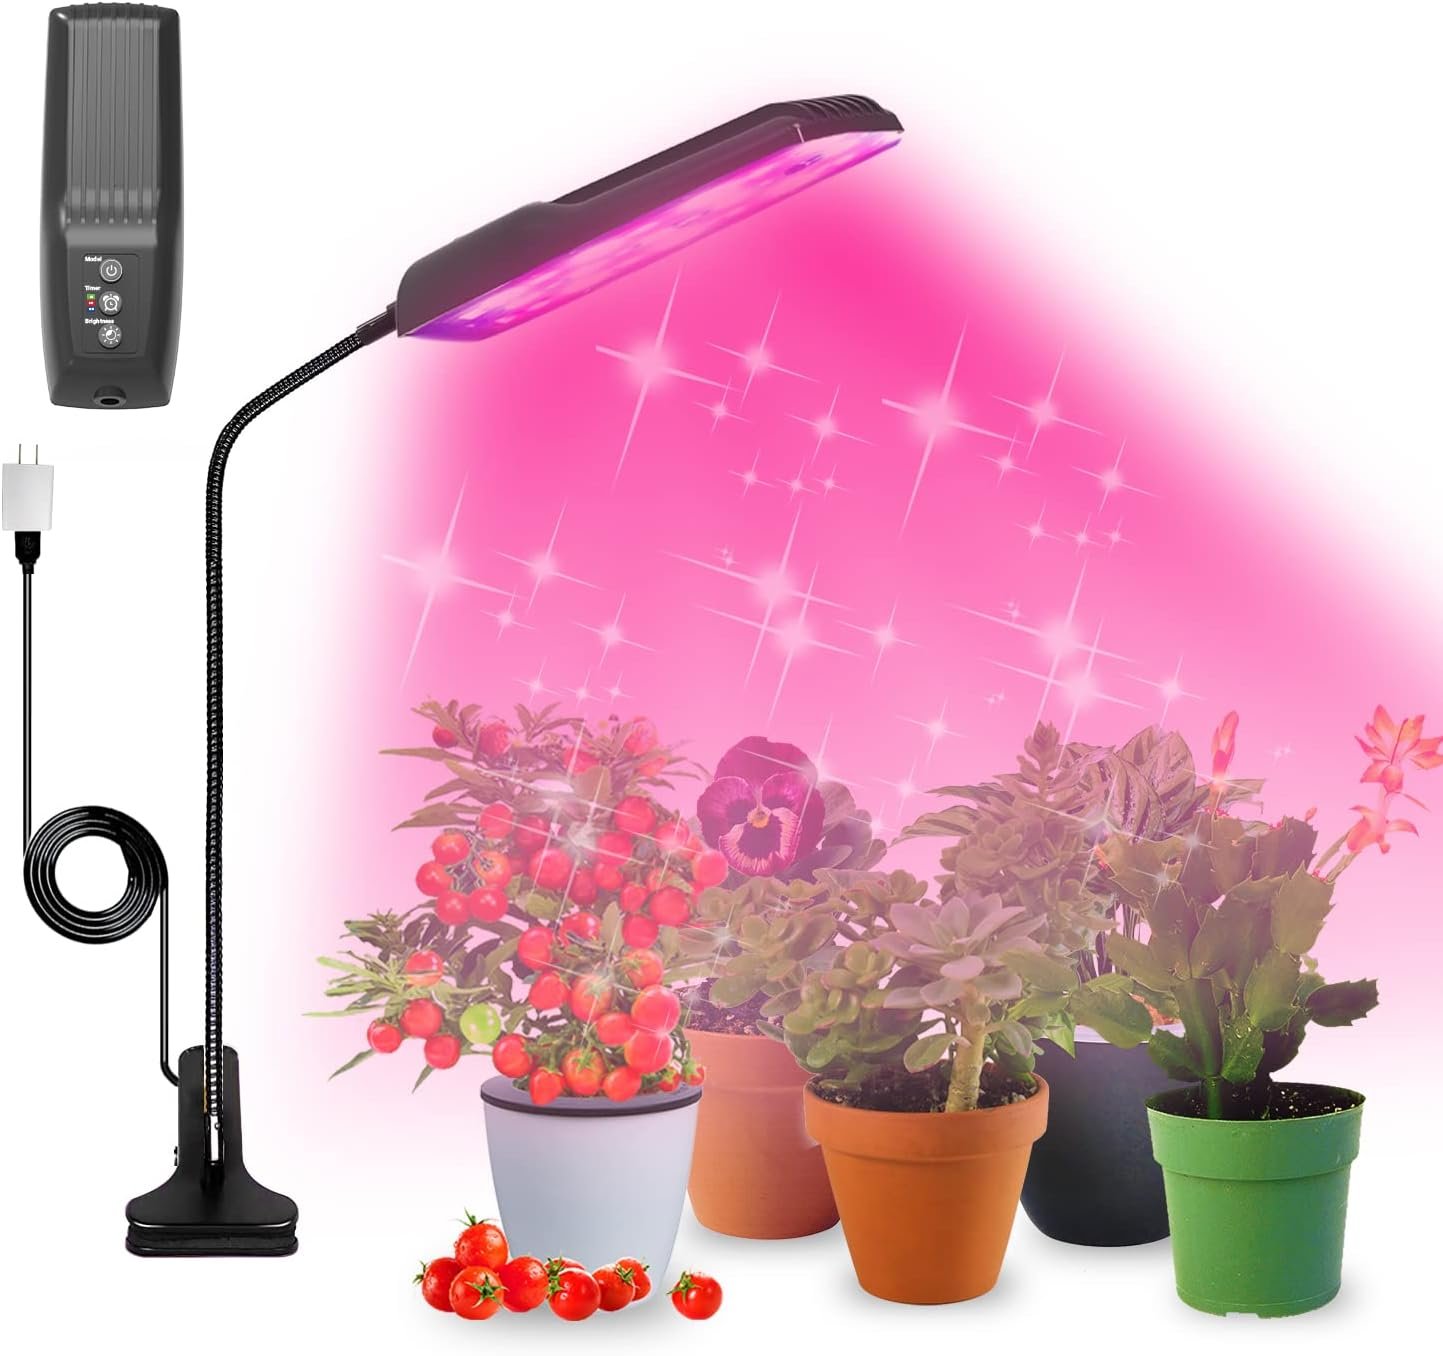 Ambgrow Grow Light for Indoor Plants, Plant Lights with Clip-3 Spectrum Models, White Red Blue Bulbs for Indoor Plants Growing, Plant Growing Lamp Auto On Off Timing 4 8 12Hrs- Upgraded